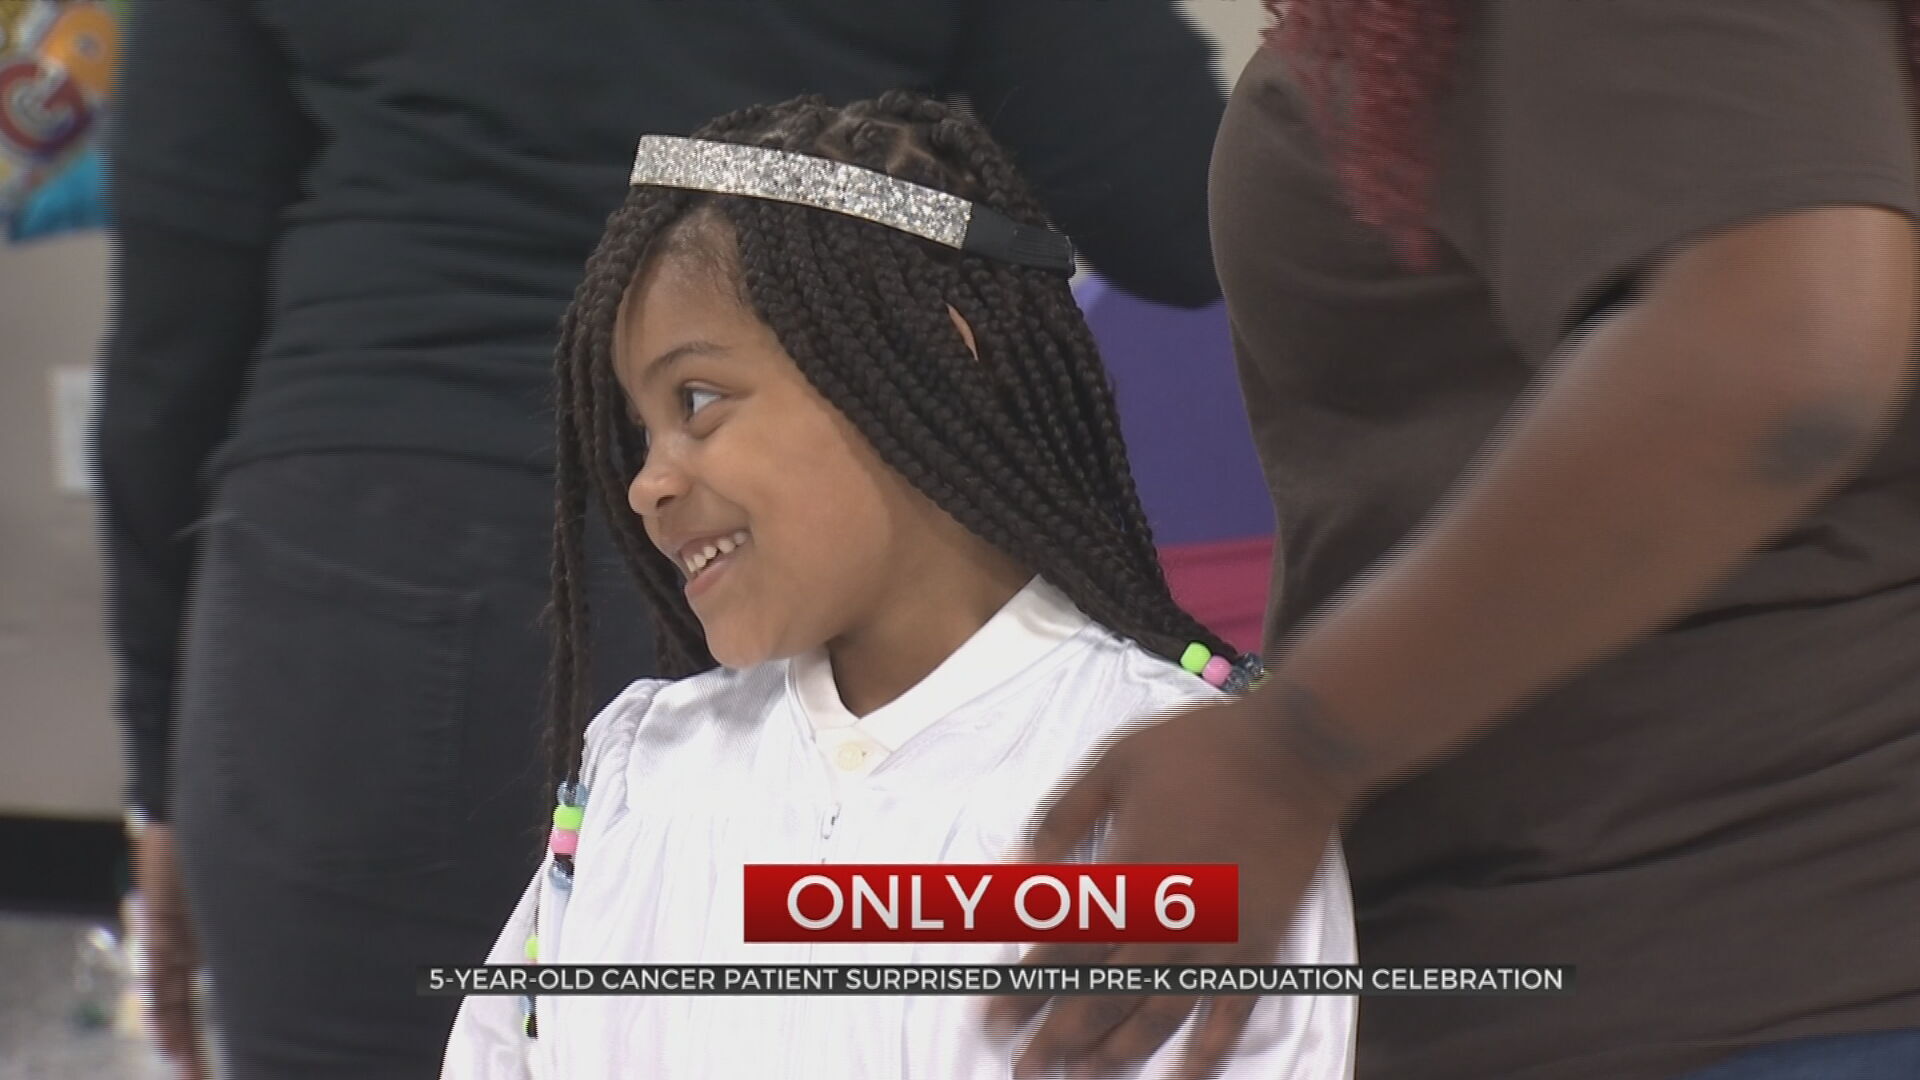 5-Year-Old Tulsa Cancer Patient Surprised With Pre-K Graduation Celebration 